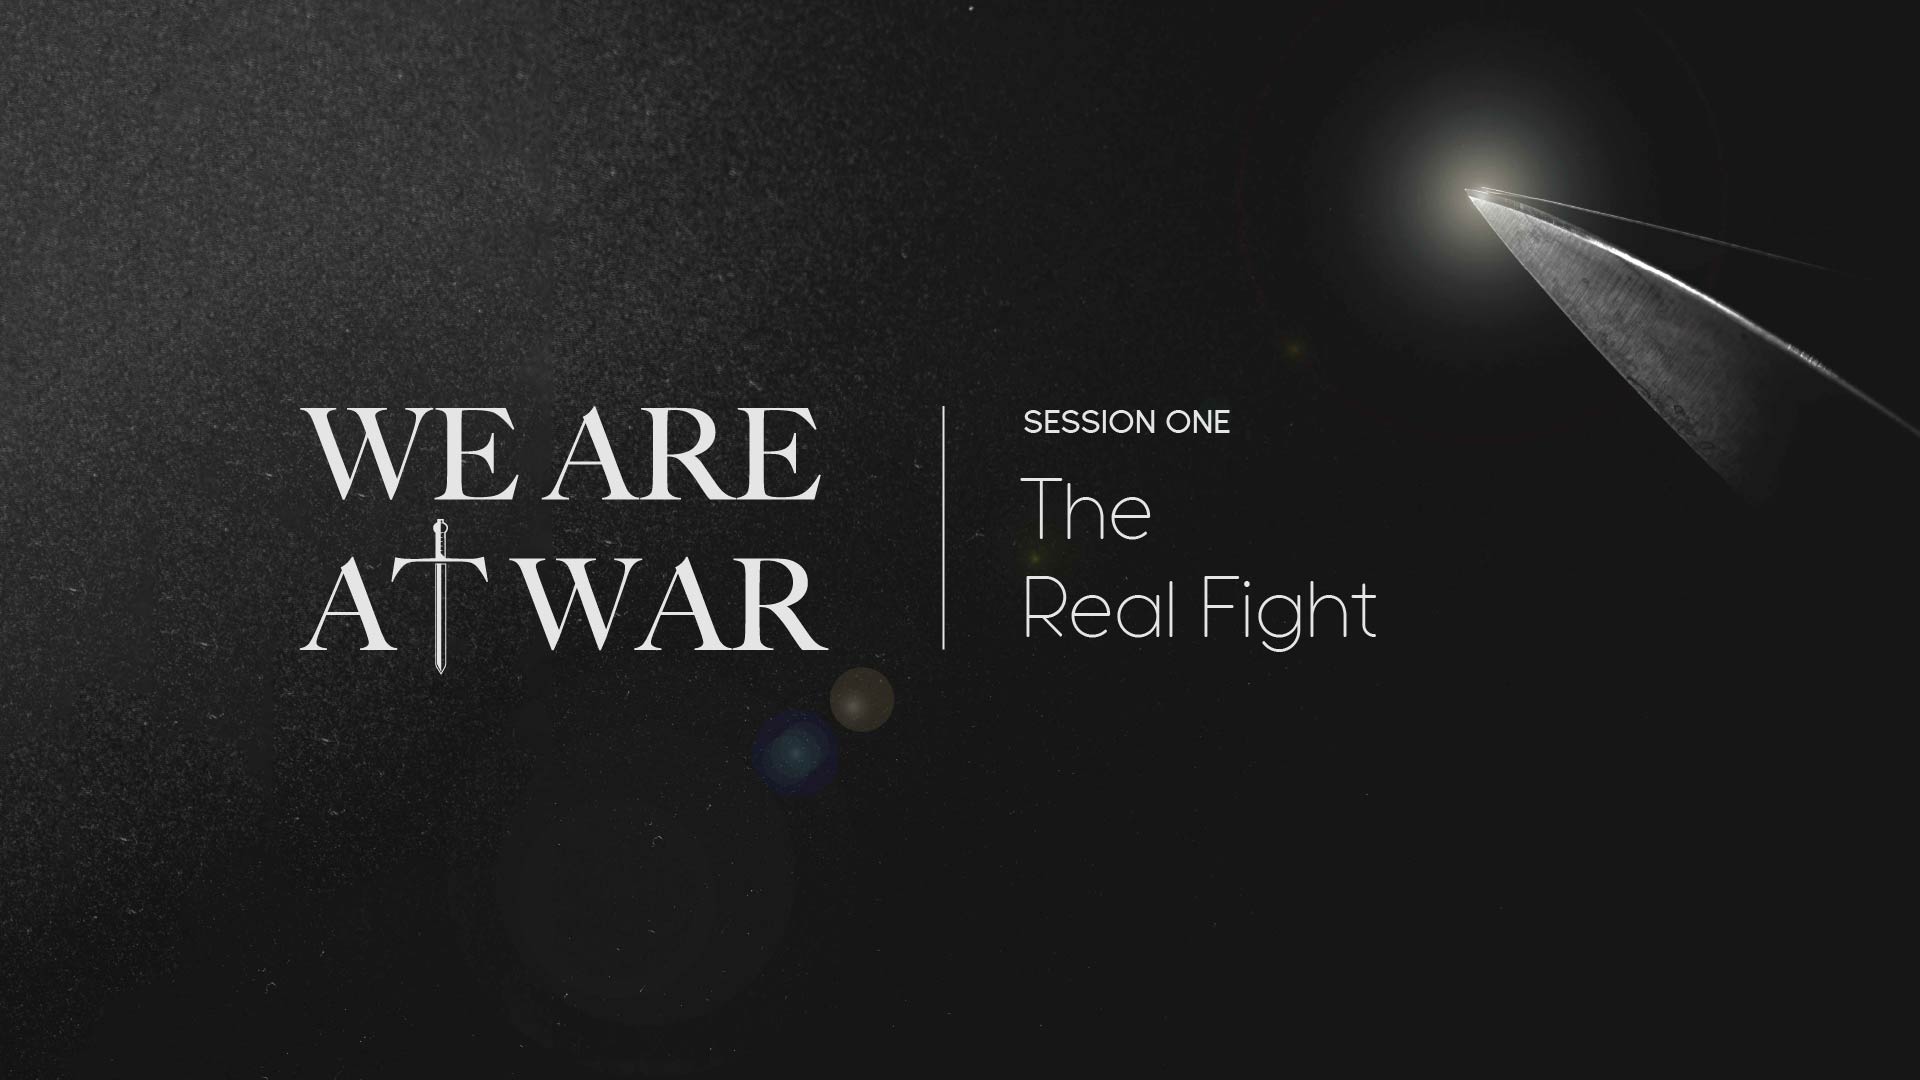 Video image for 'We Are at A War’ about the fight for freedom in Christ